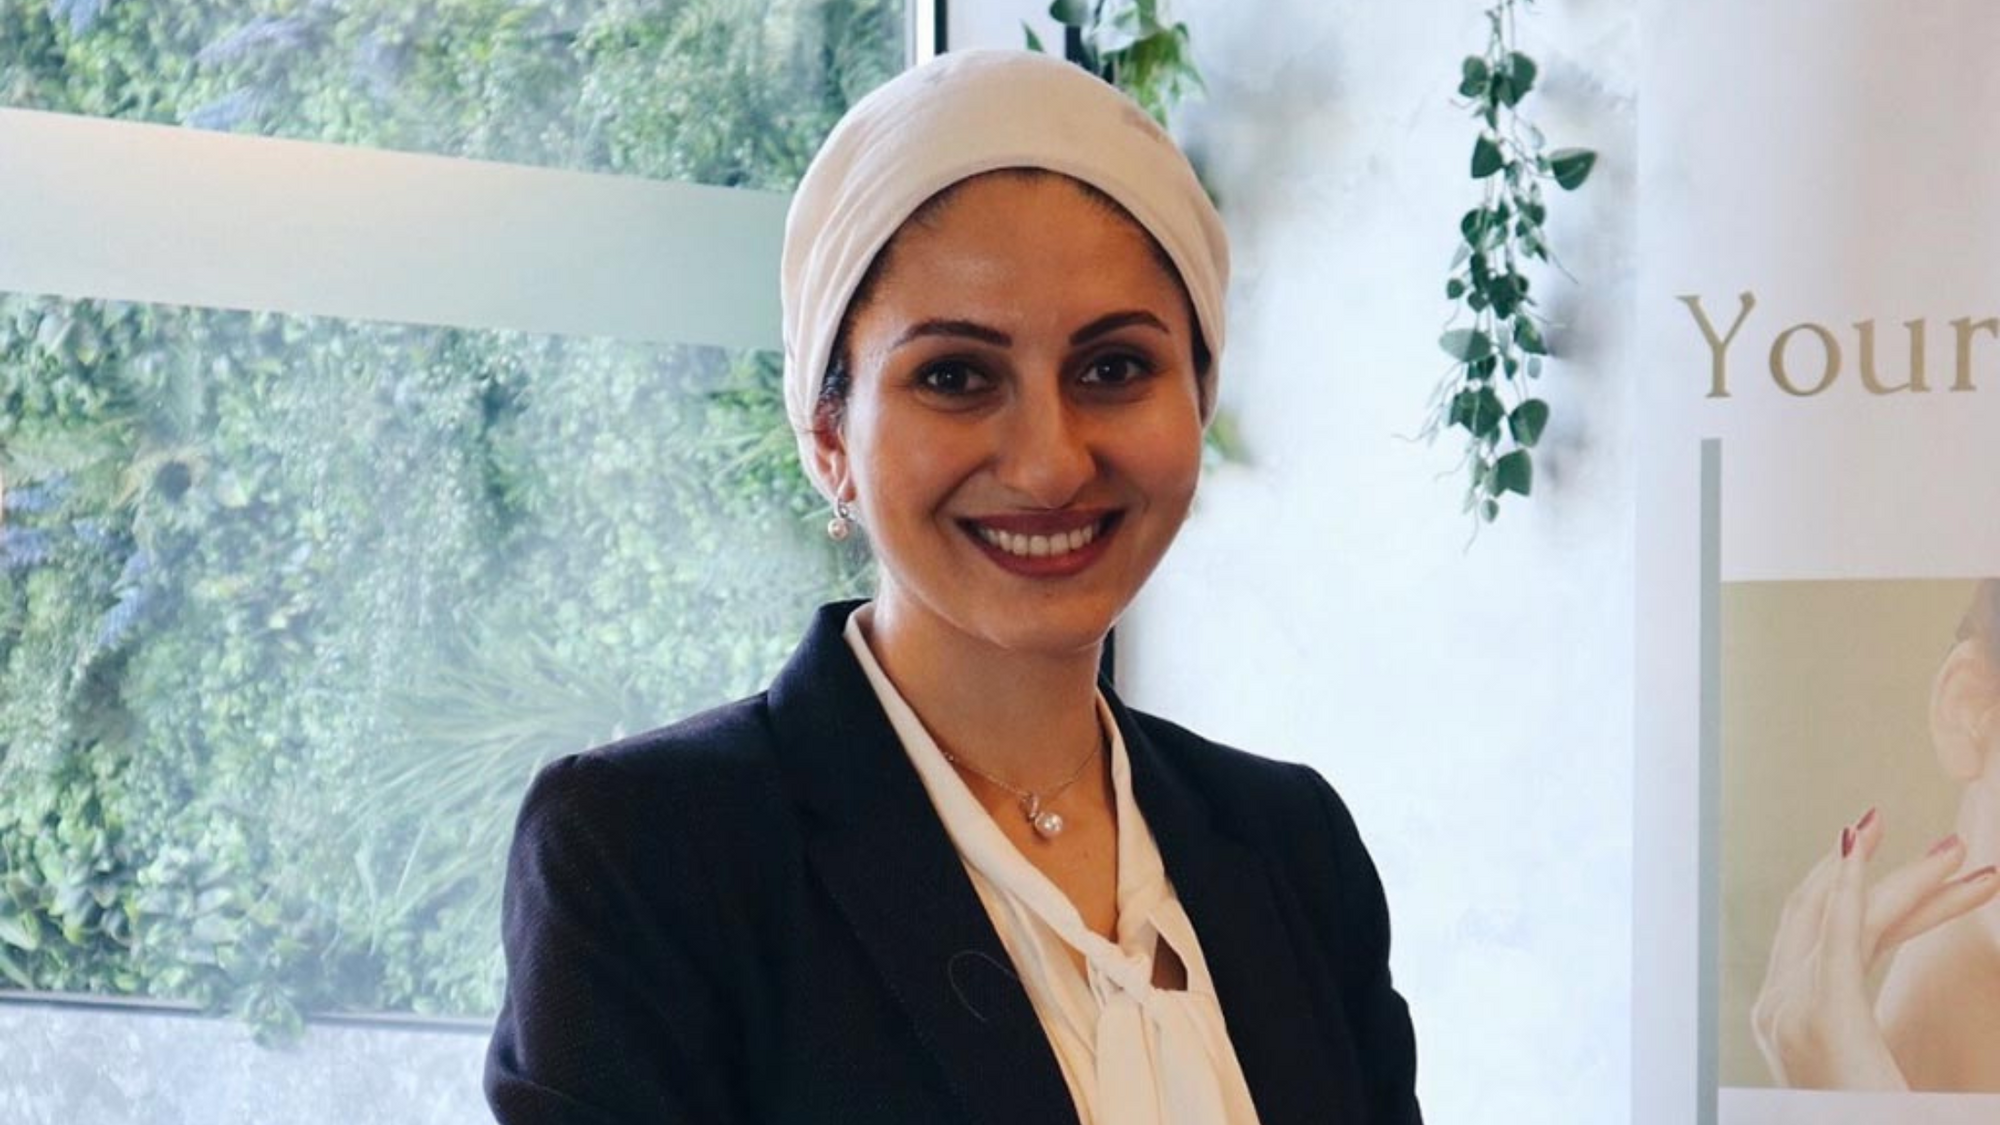 We've got you covered with Dr Heba Jibreal